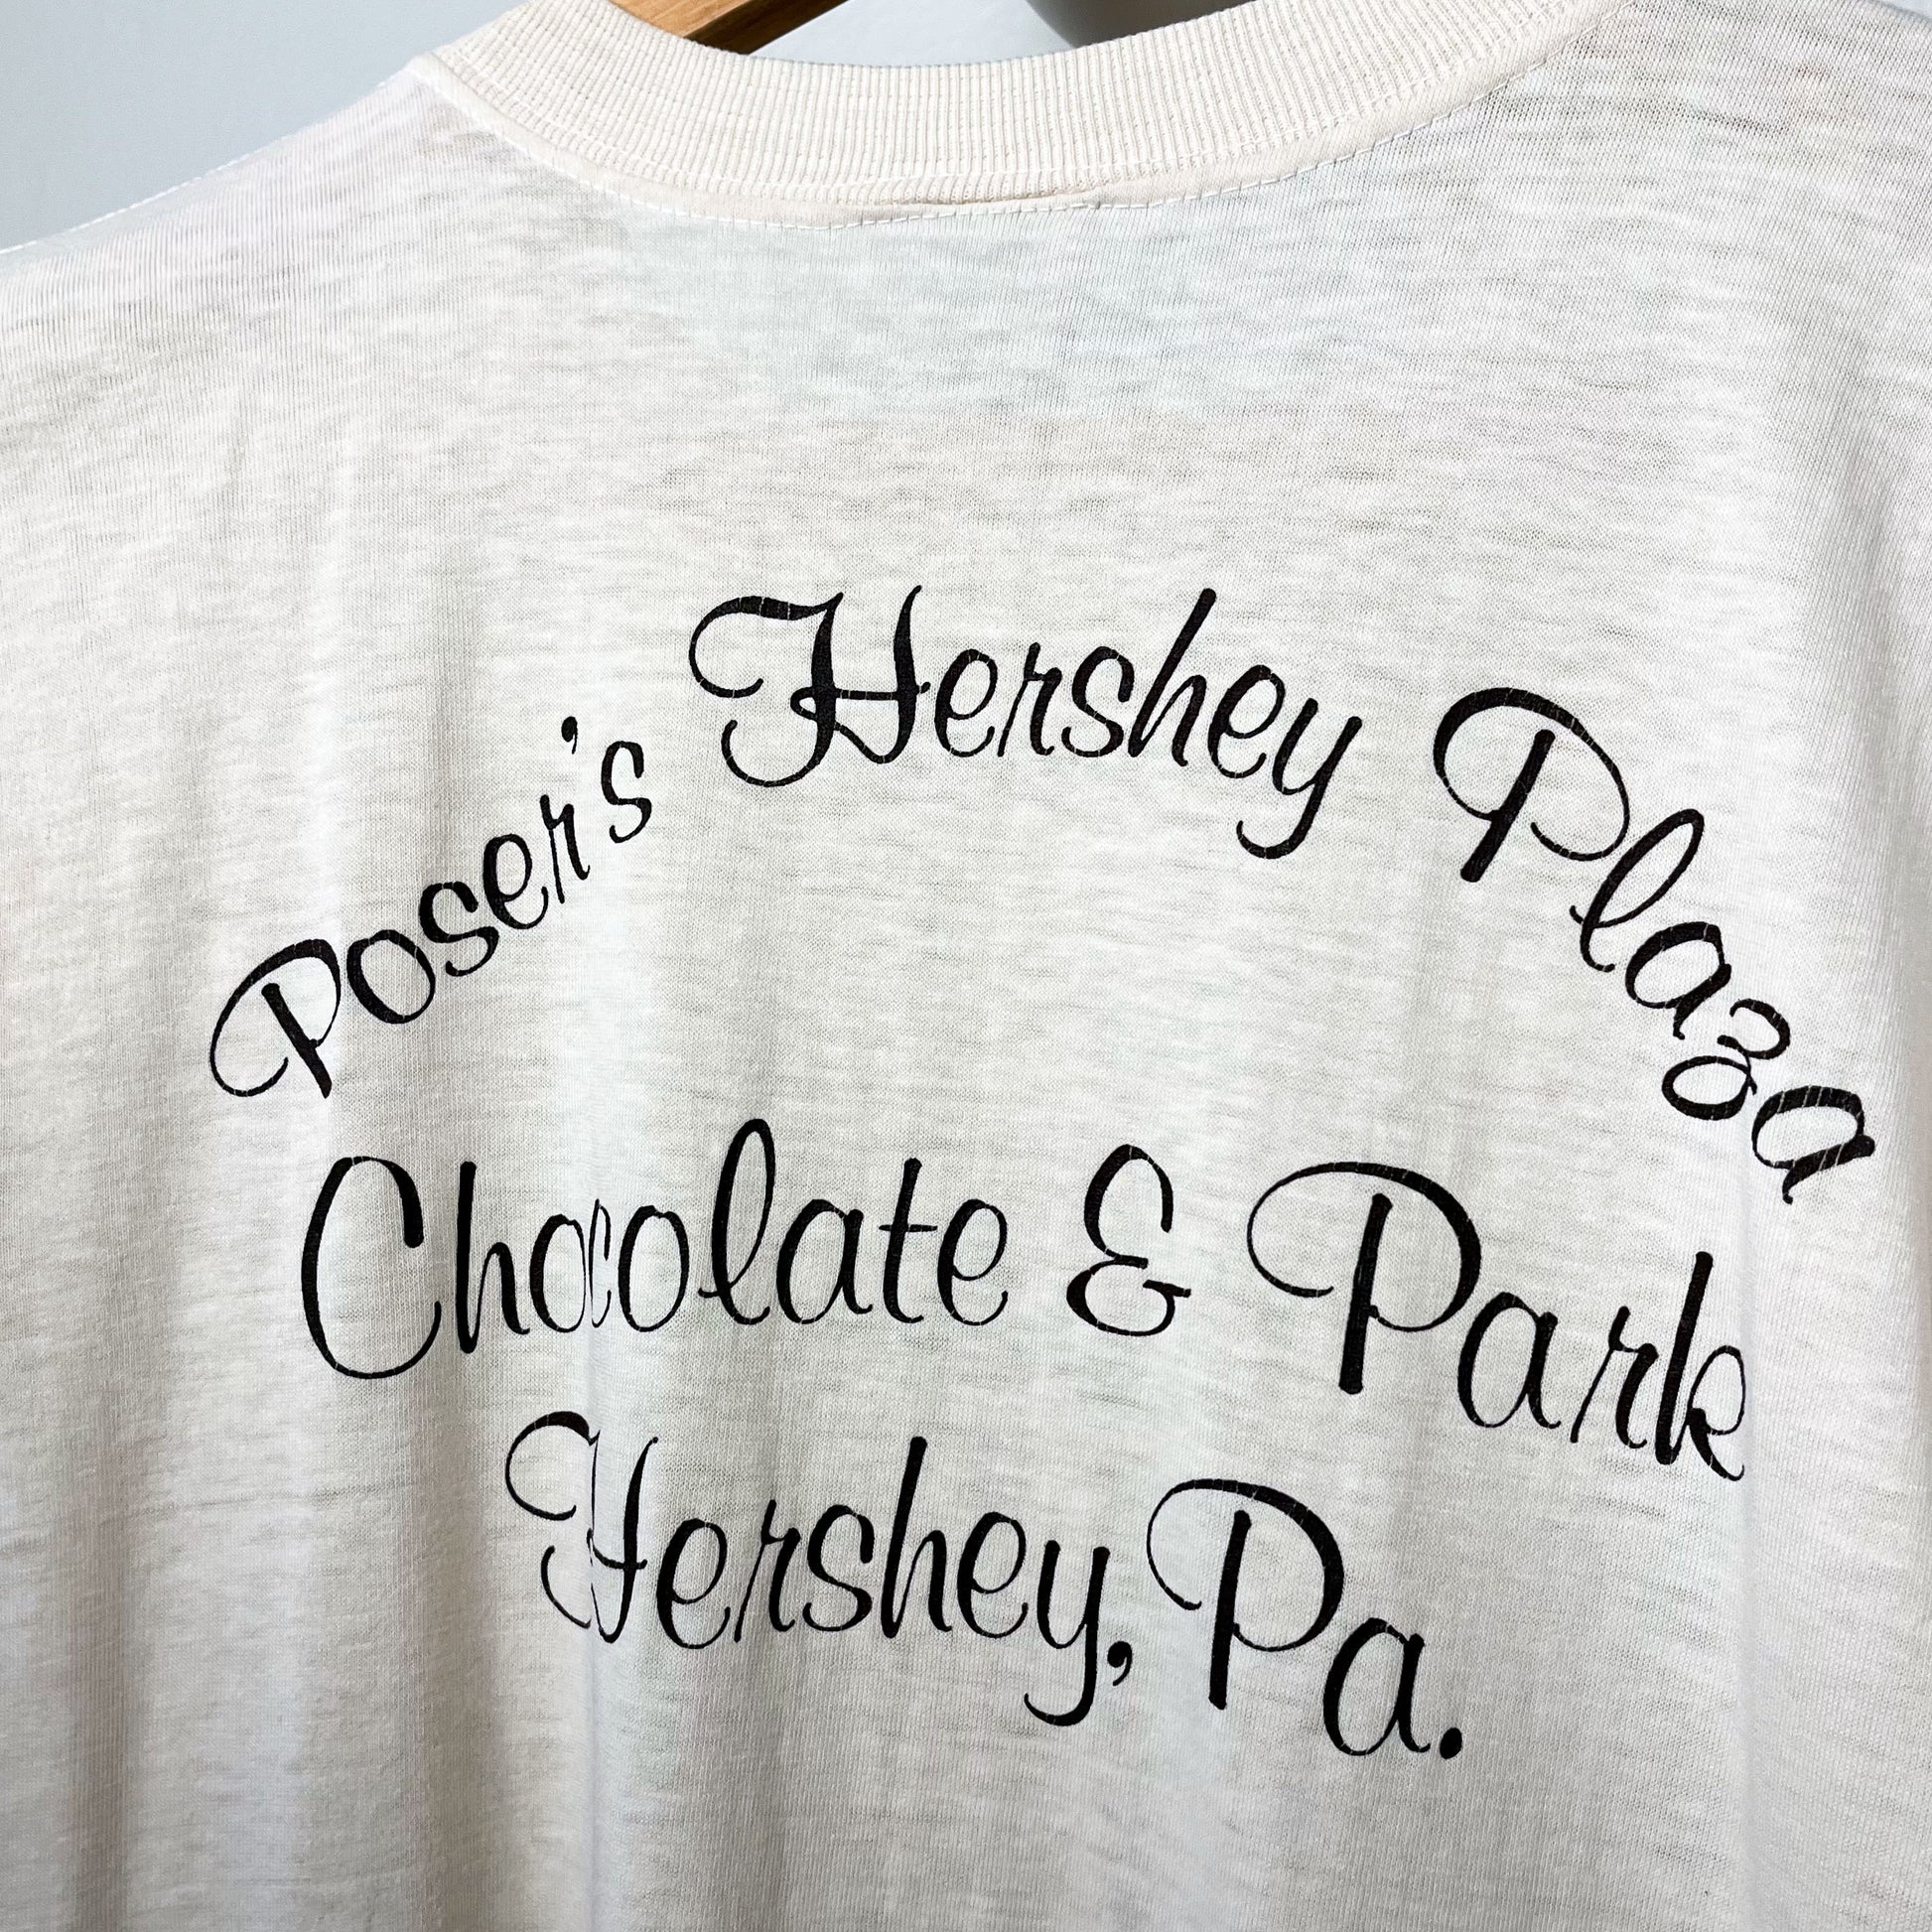 back side of a cream colored t-shirt that says Poser's Hershey Plaza Chocolate & Park Hershey, Pa. in scripty font